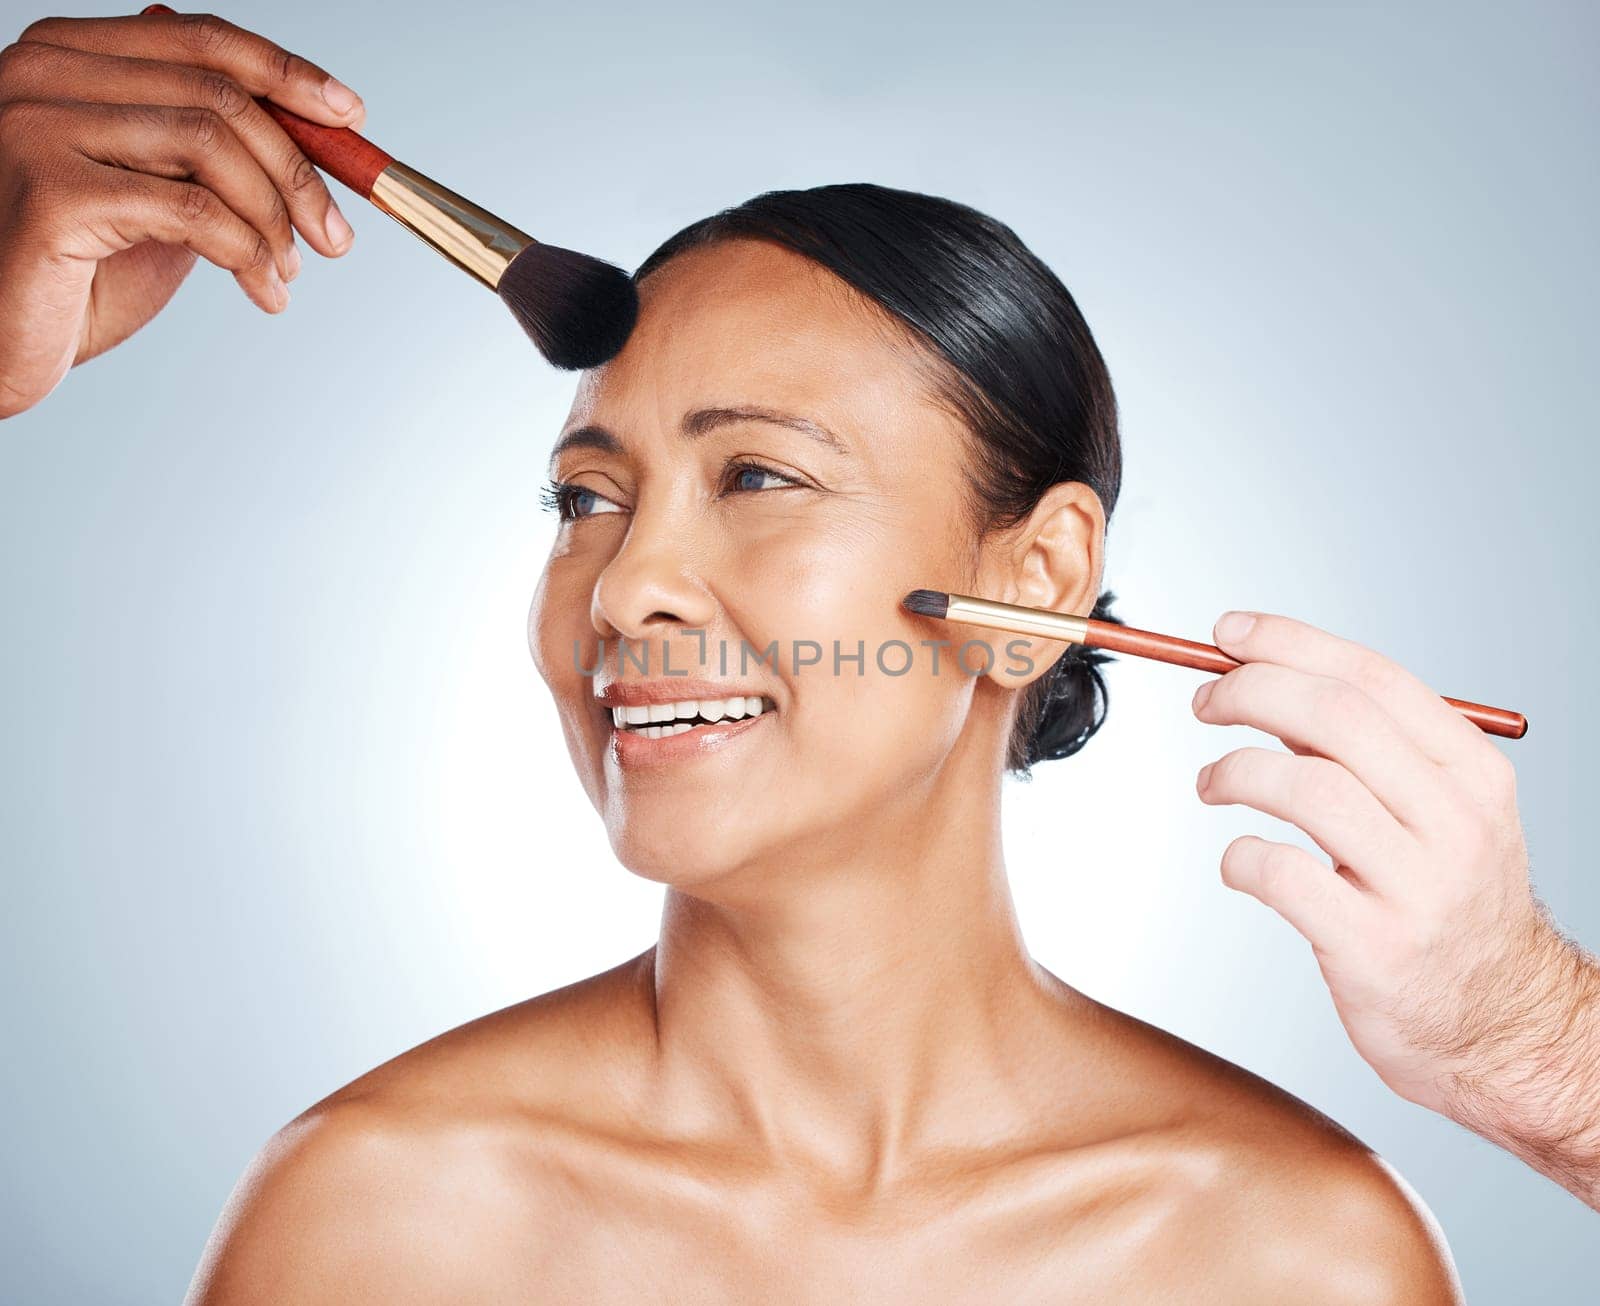 Woman, hands and smile for beauty makeup, cosmetics or facial treatment against a grey studio background. Happy female model smiling in satisfaction for skincare, pamper and brushes on her face.